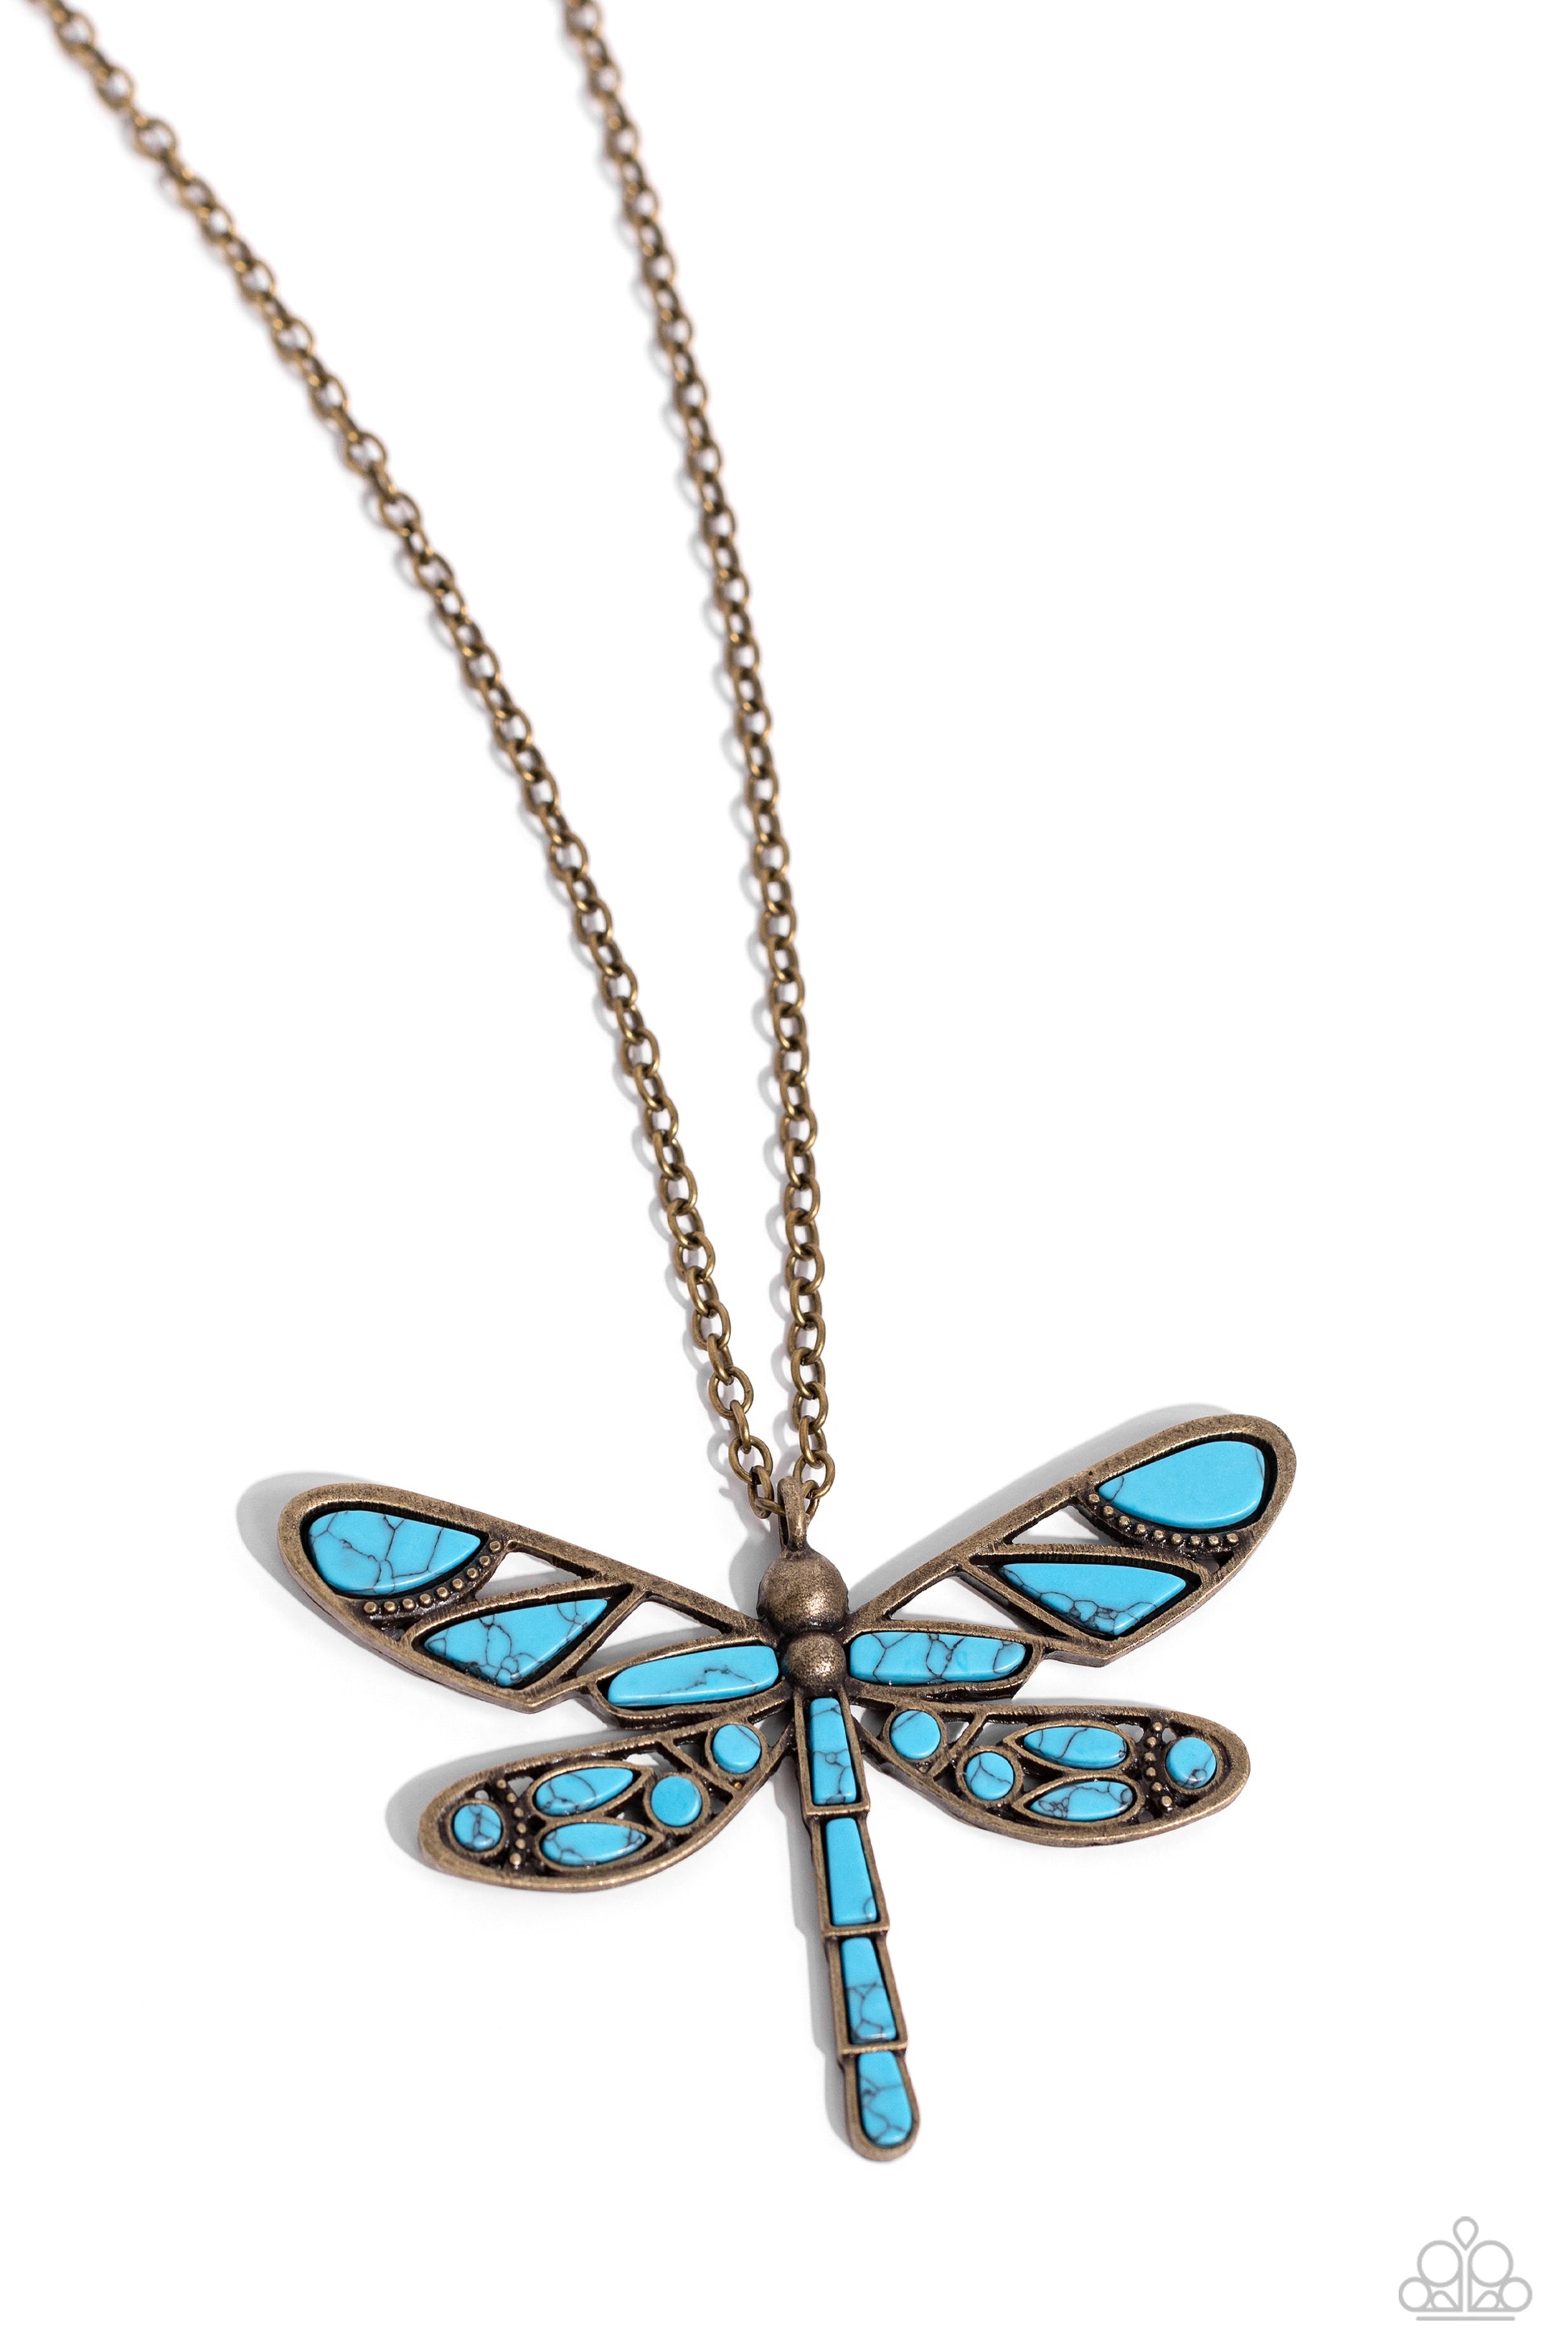 Paparazzi Accessories - Flying Low - Brass Necklaces featuring a classic brass chain, various cuts of turquoise stone are passed into an oversized, airy brass dragonfly pendant for a rustically earthy centerpiece. Features an adjustable clasp closure. As the stone elements in this piece are natural, some color variation is normal.  Sold as one individual necklace. Includes one pair of matching earrings.